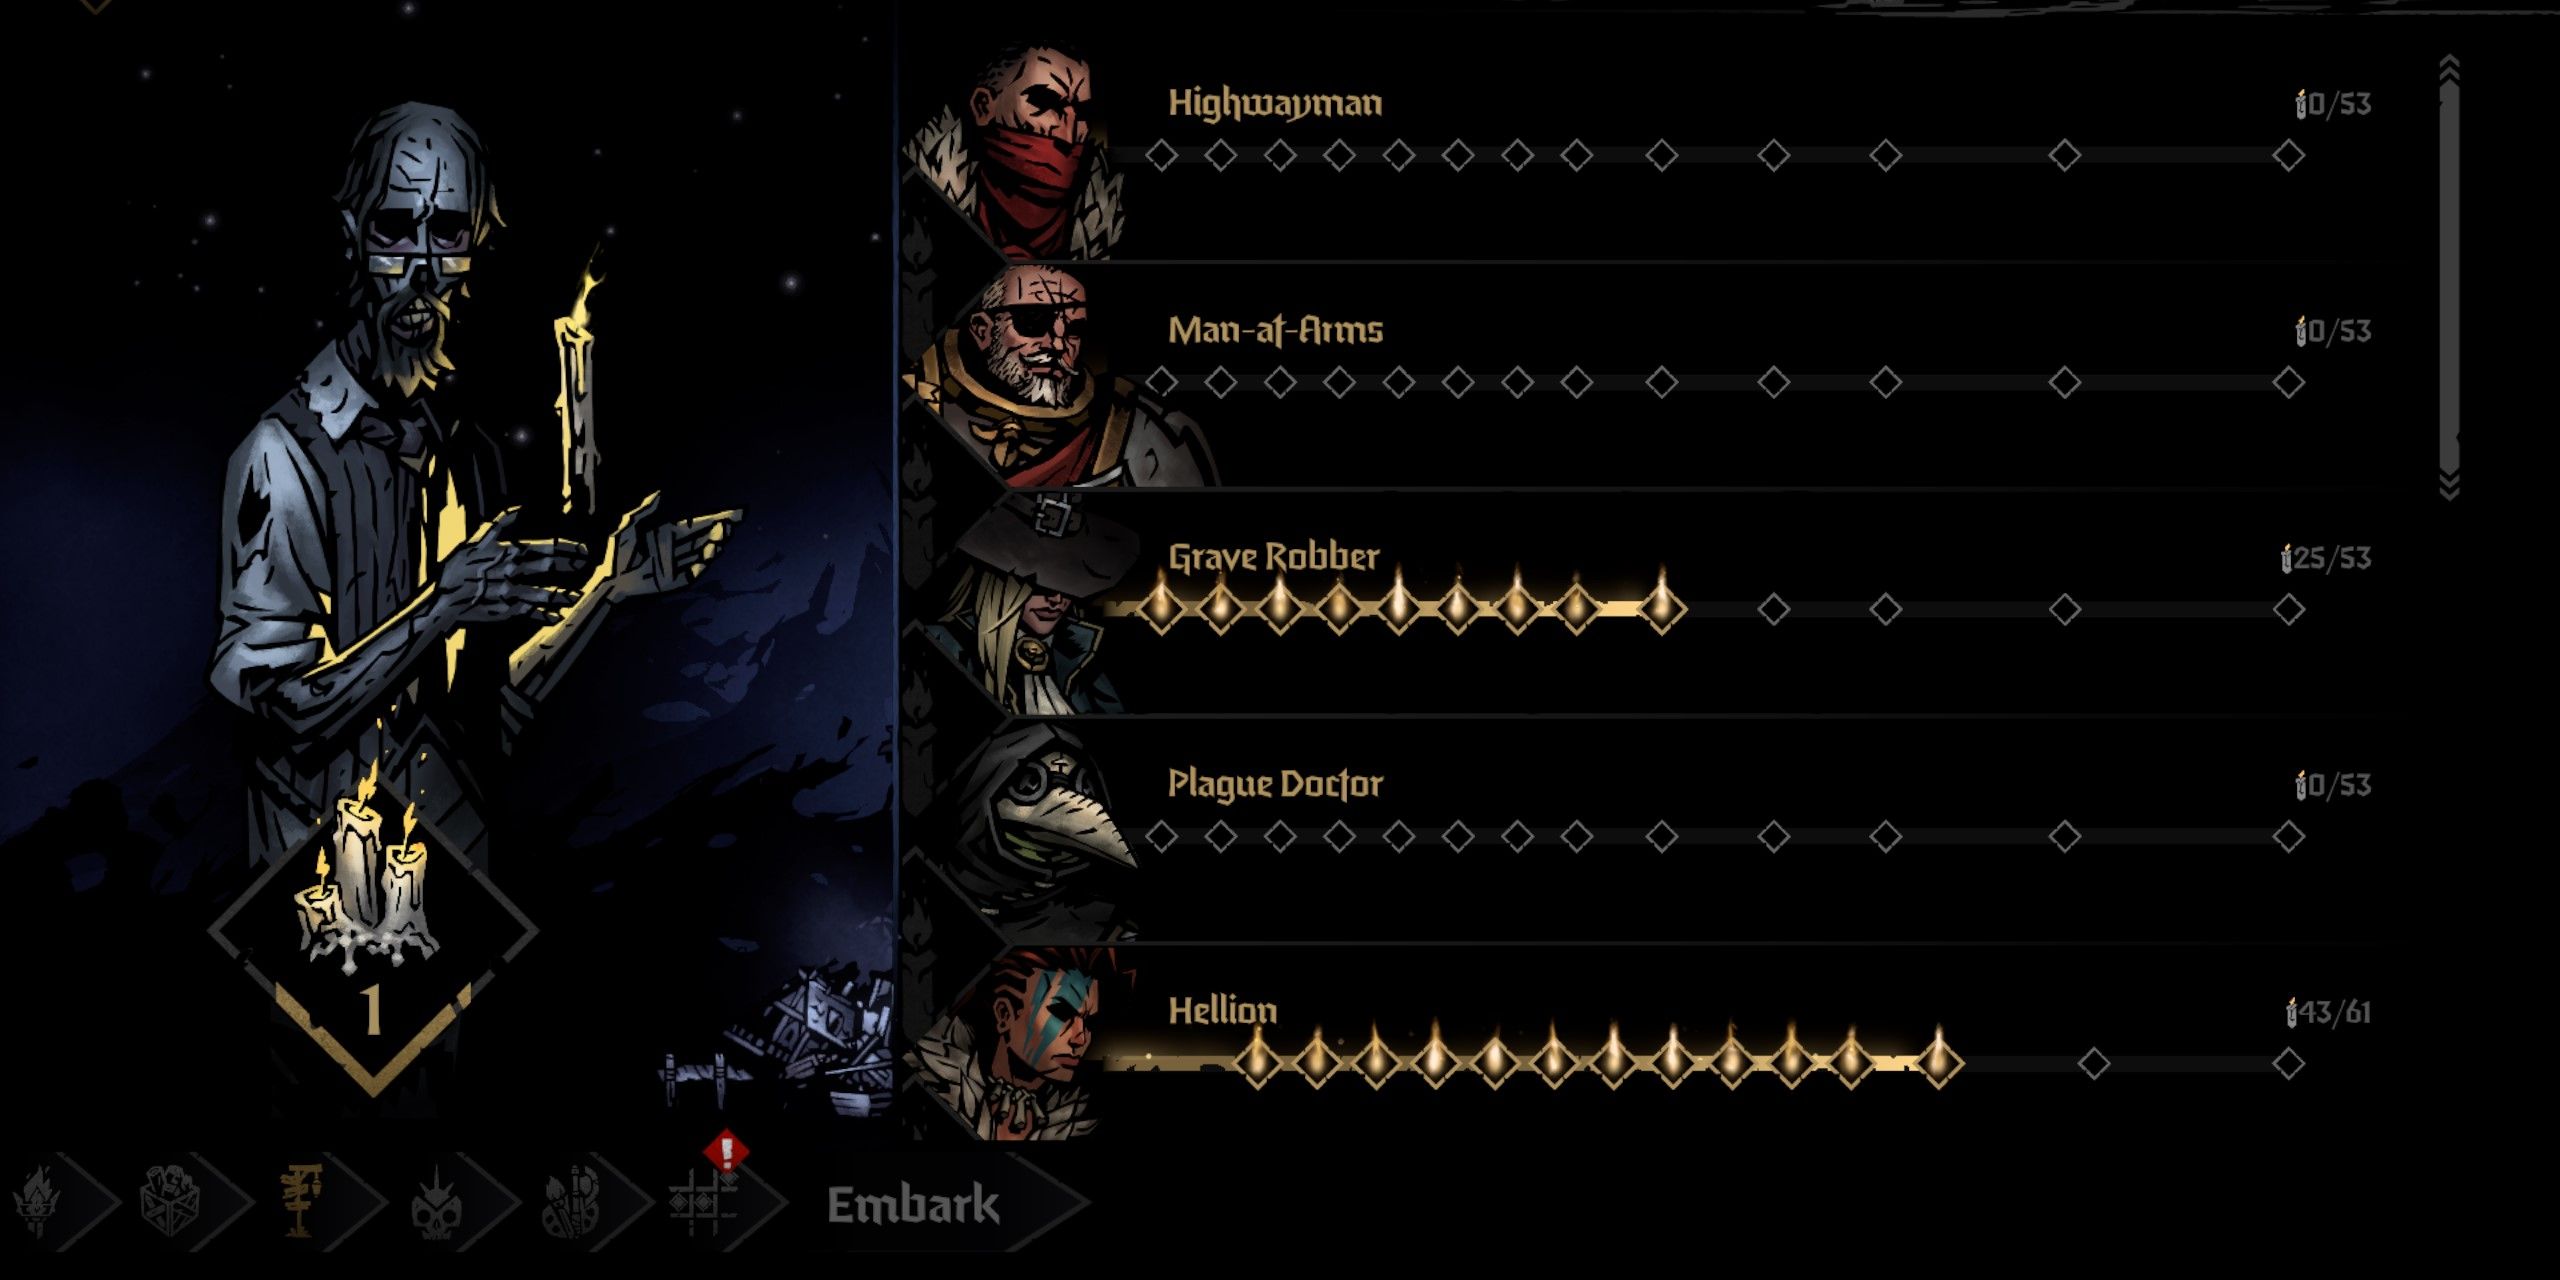 The Living city screen inside the Altar of Hope from videogame Darkest Dungeon 2